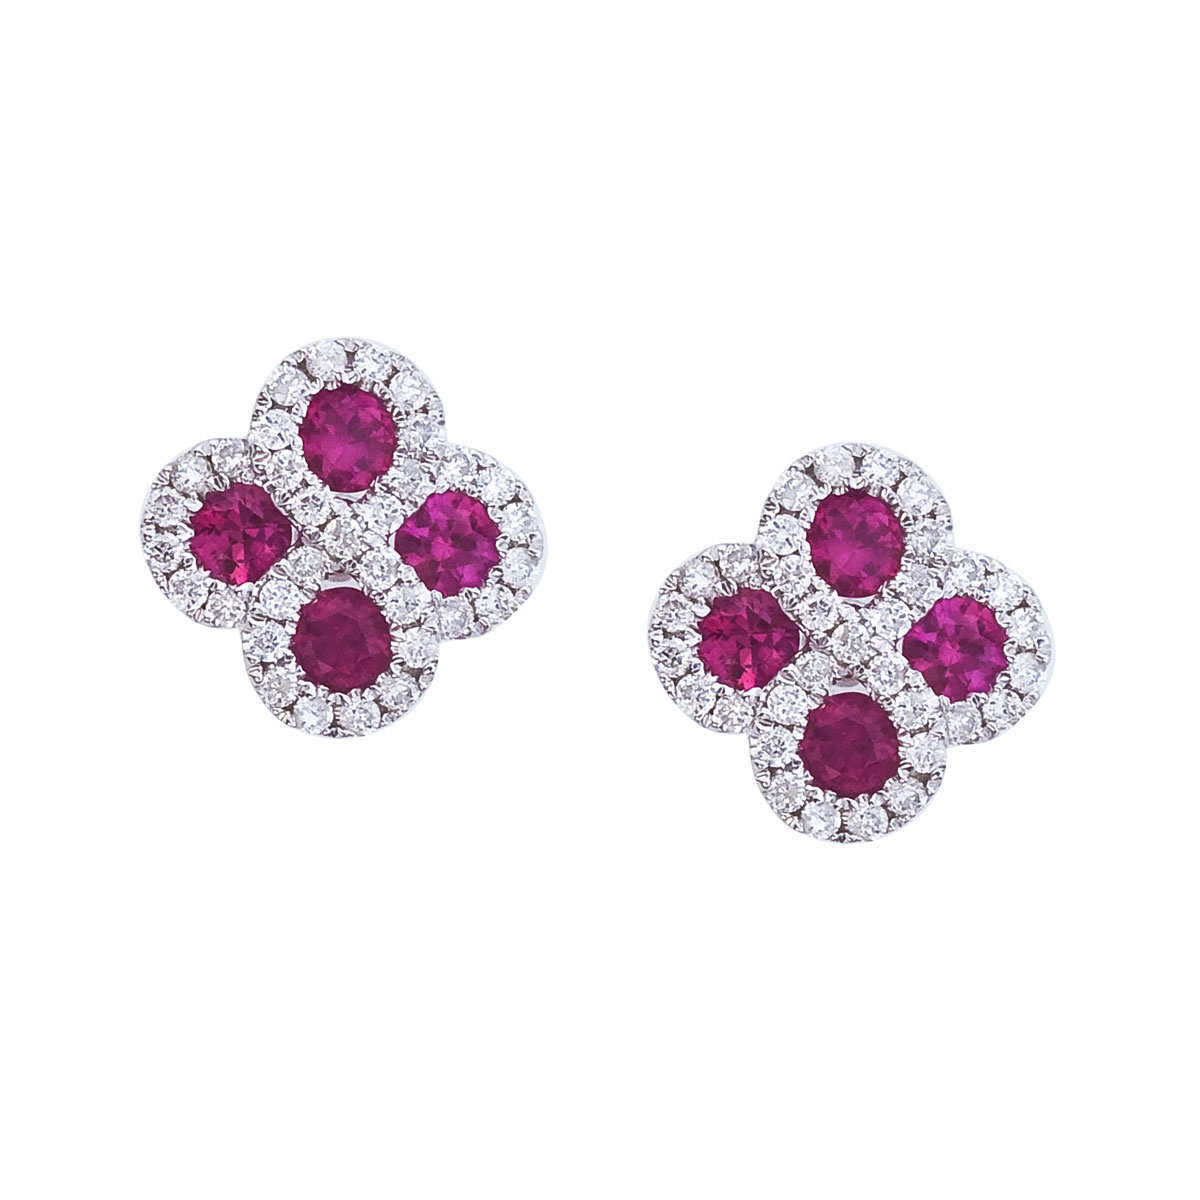 Beautiful clover shaped earrings with 2.7 mm rubies surrounded by gleaming diamonds.